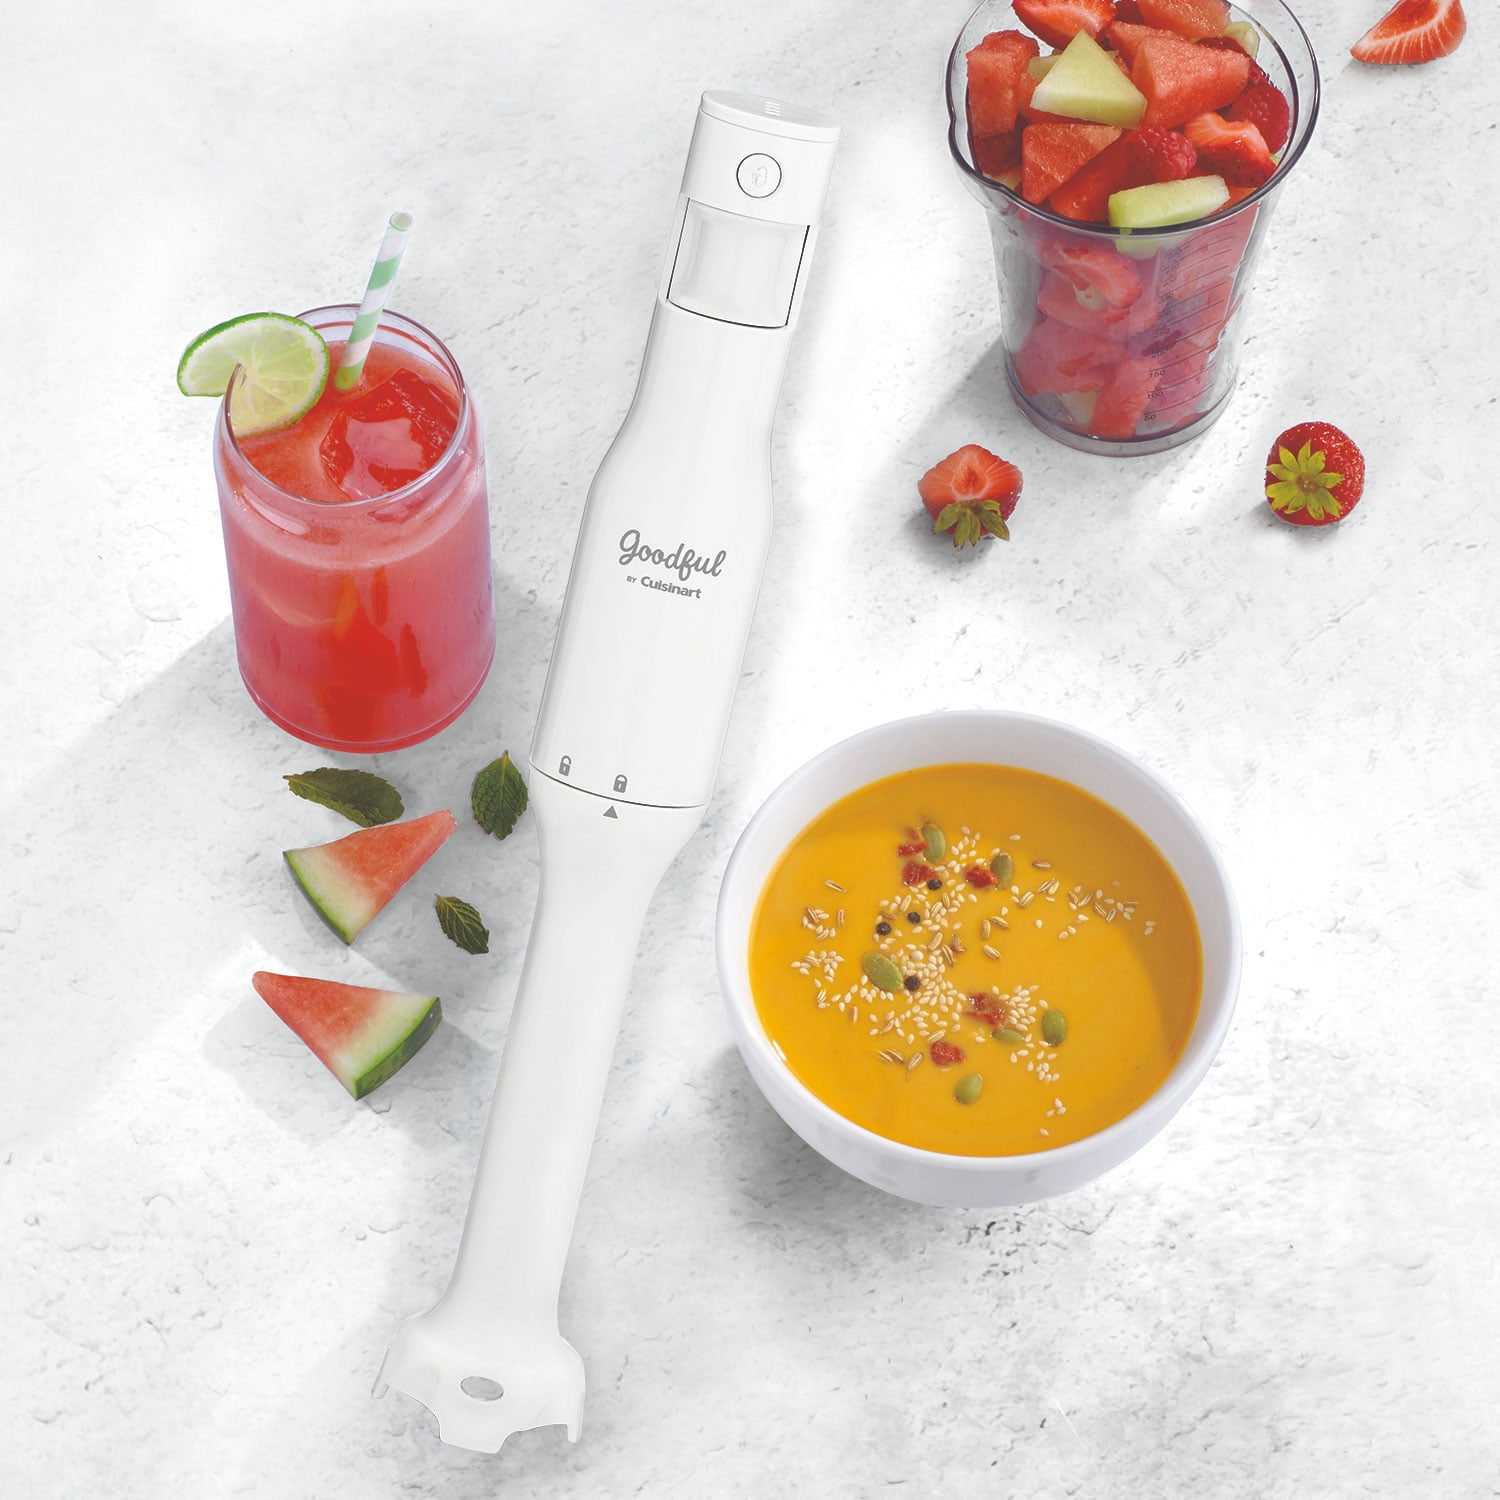  Goodful by Cuisinart Electric Hand Blender & Mixer, Goodful  Collection, 400 Watts of Power, HB400GF: Home & Kitchen